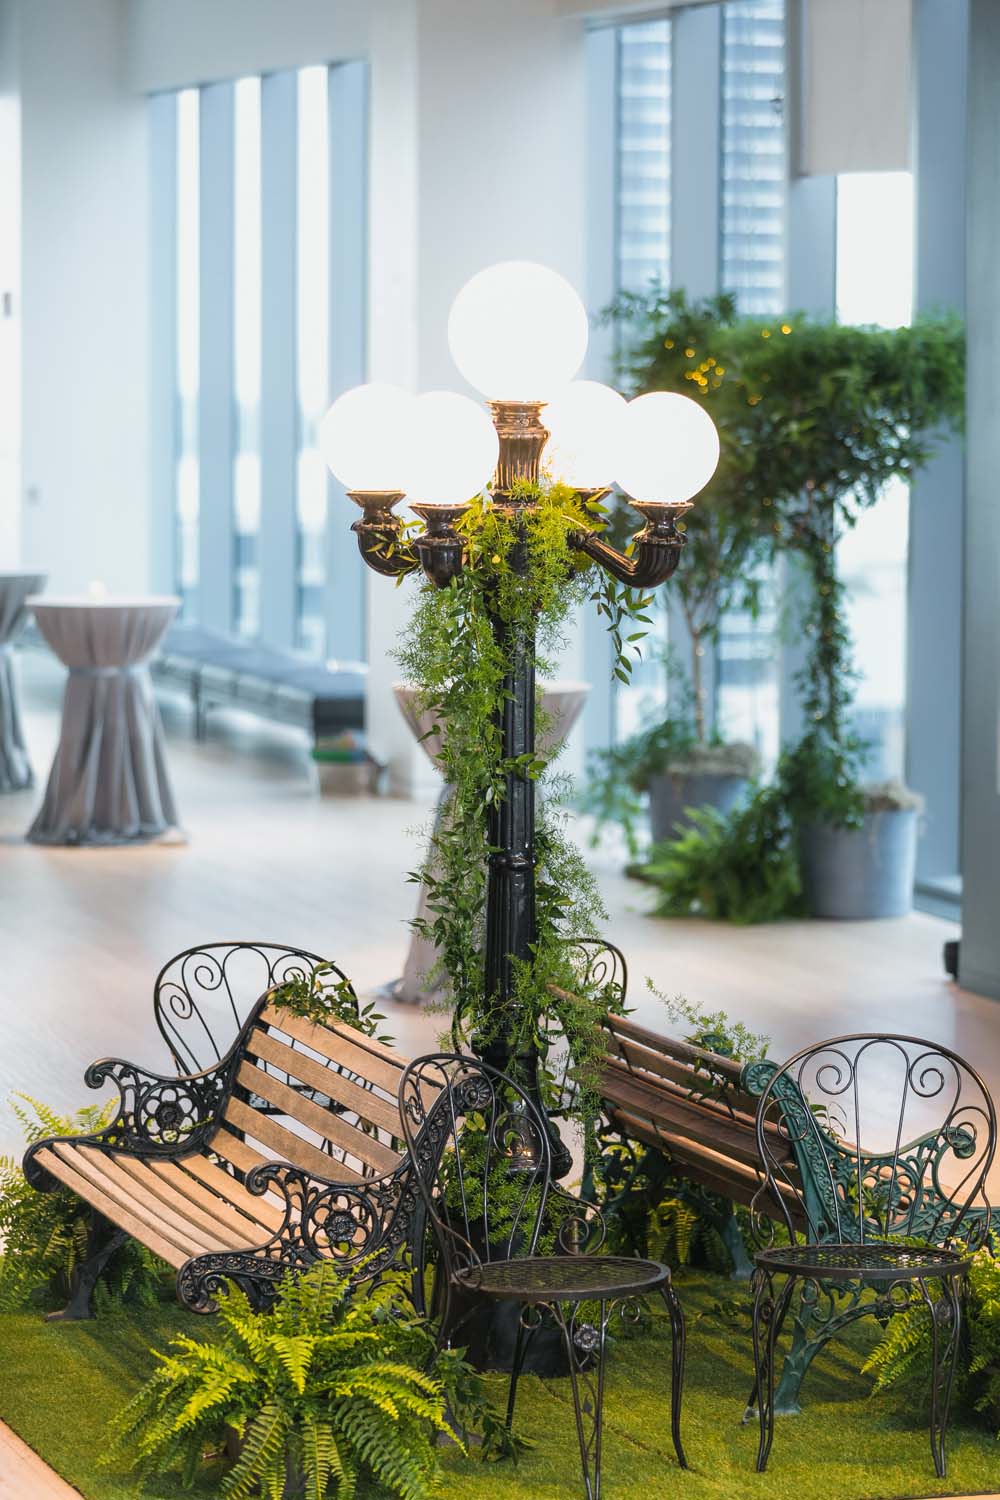 This Toronto Wedding Brings Nature to the City - Benches